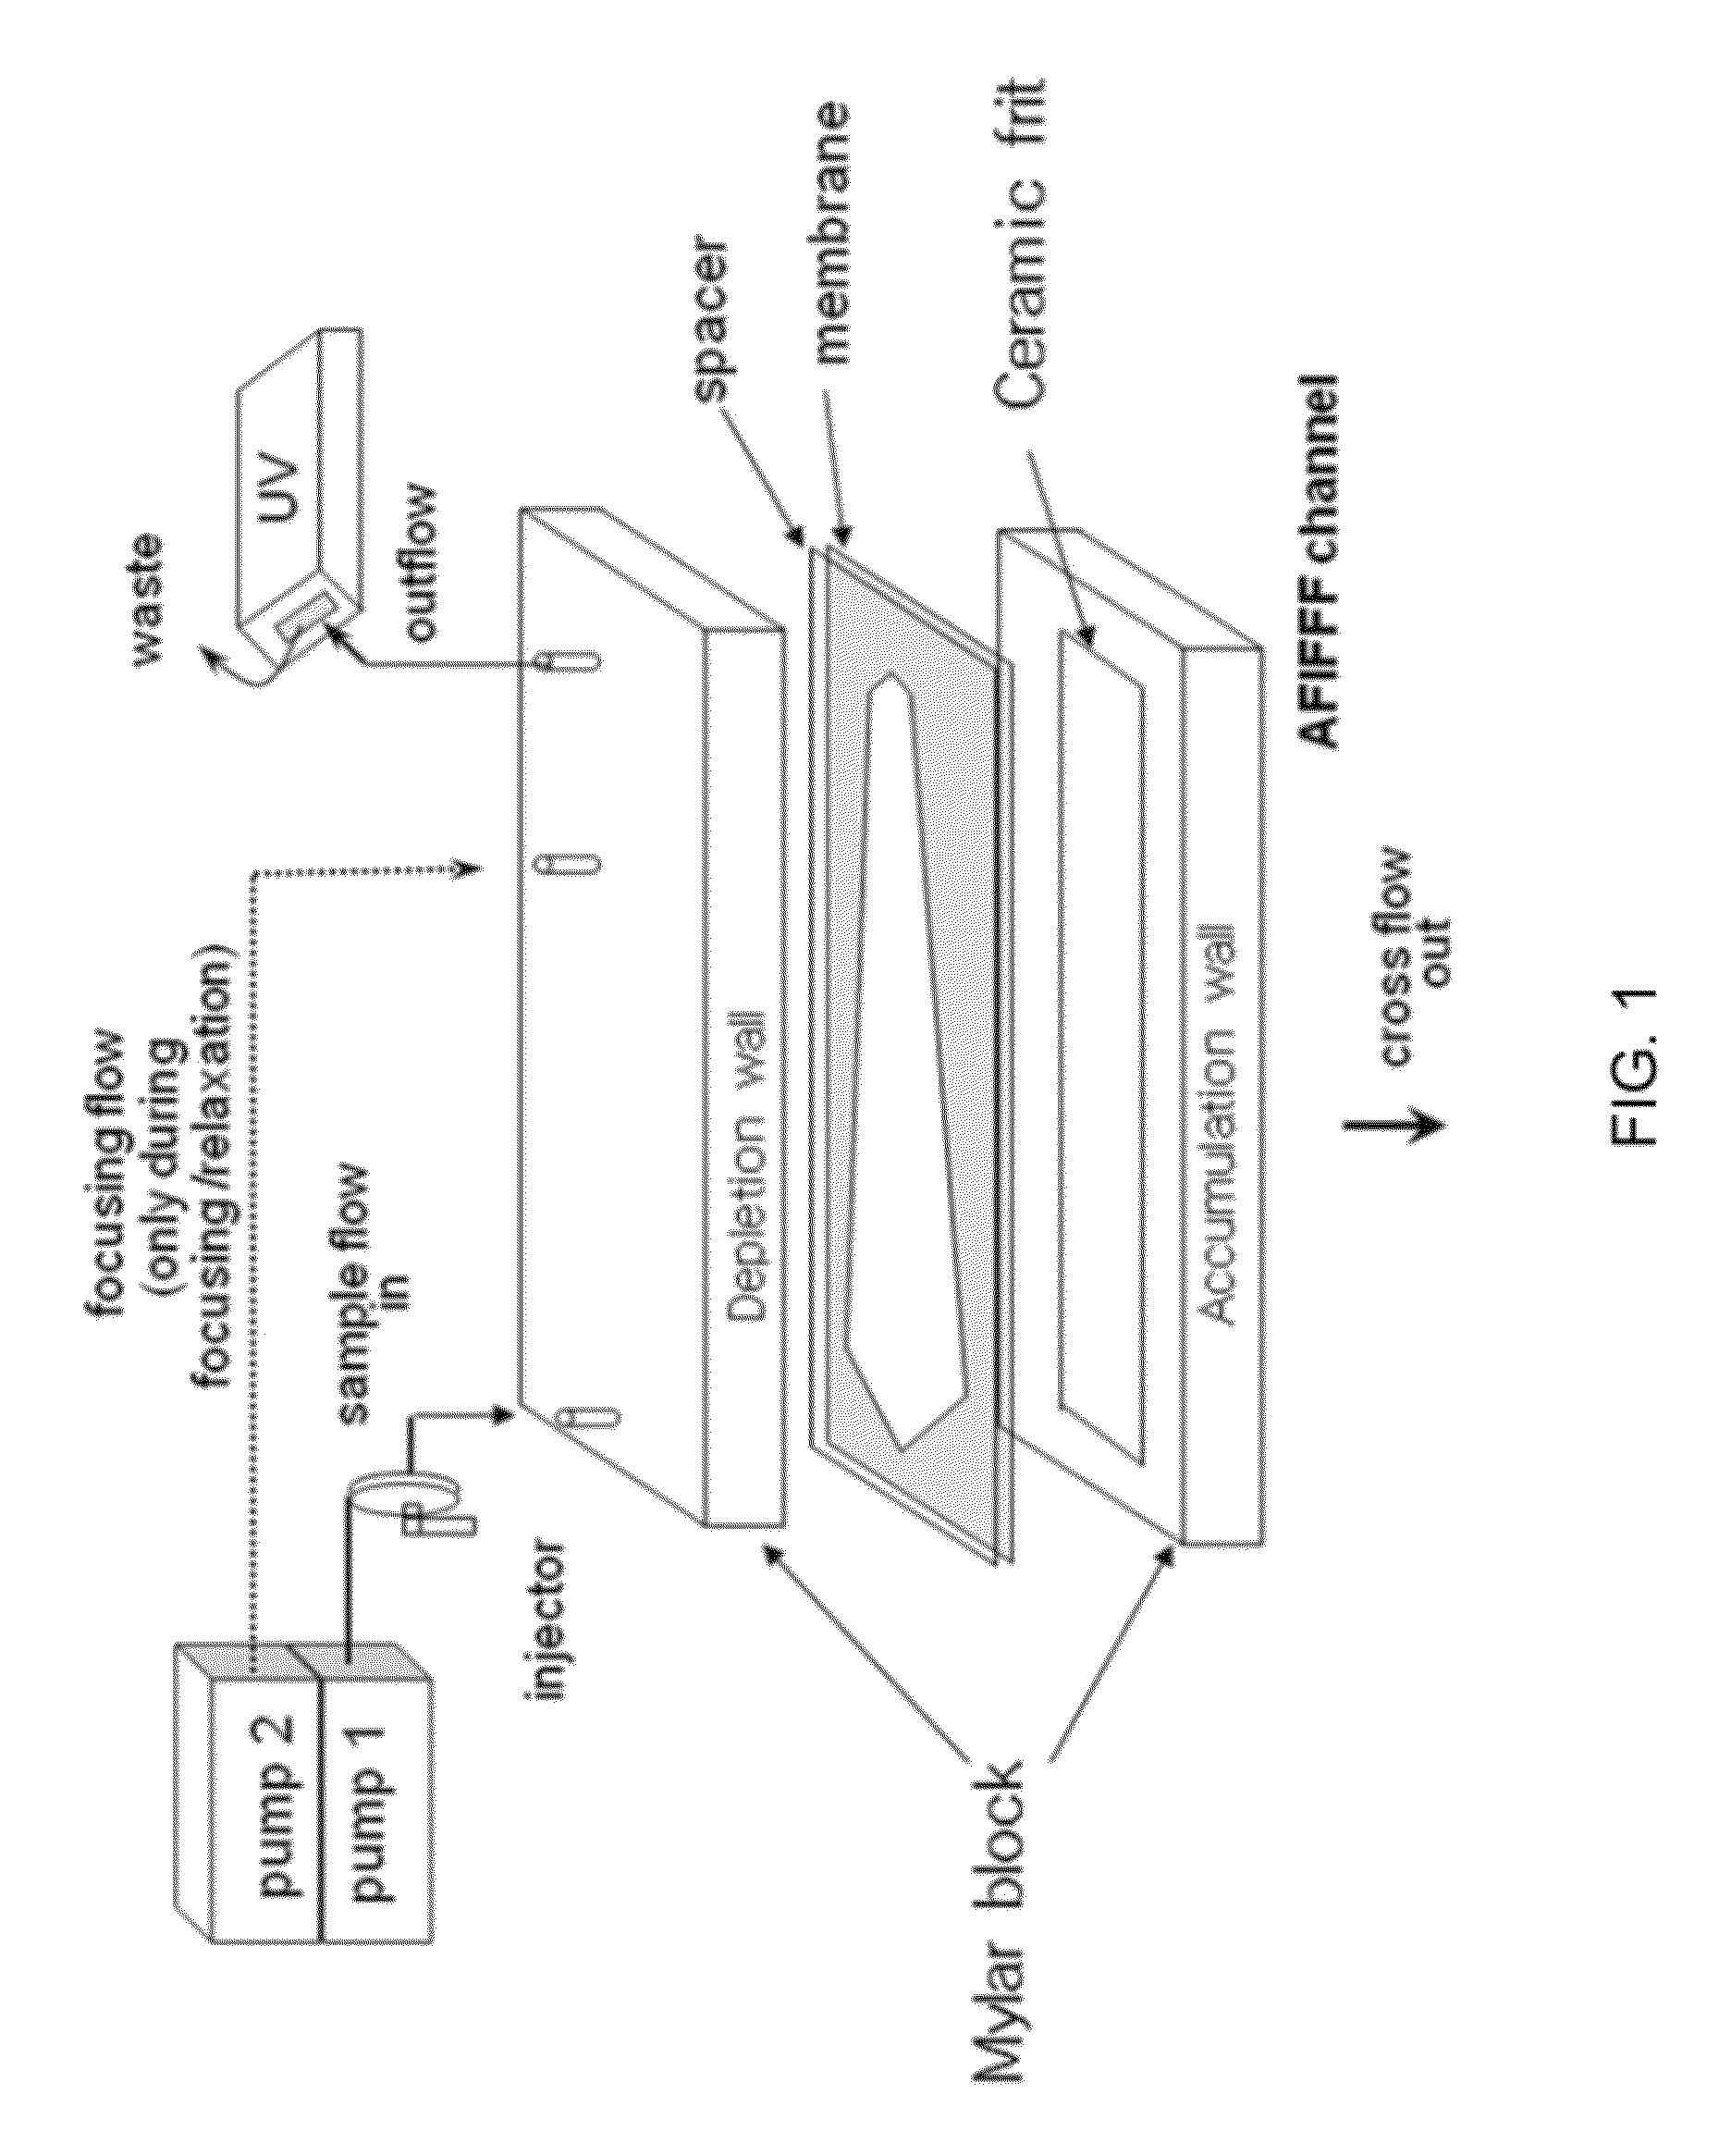 Non-gel based two-dimensional protein separation multi-channel devices